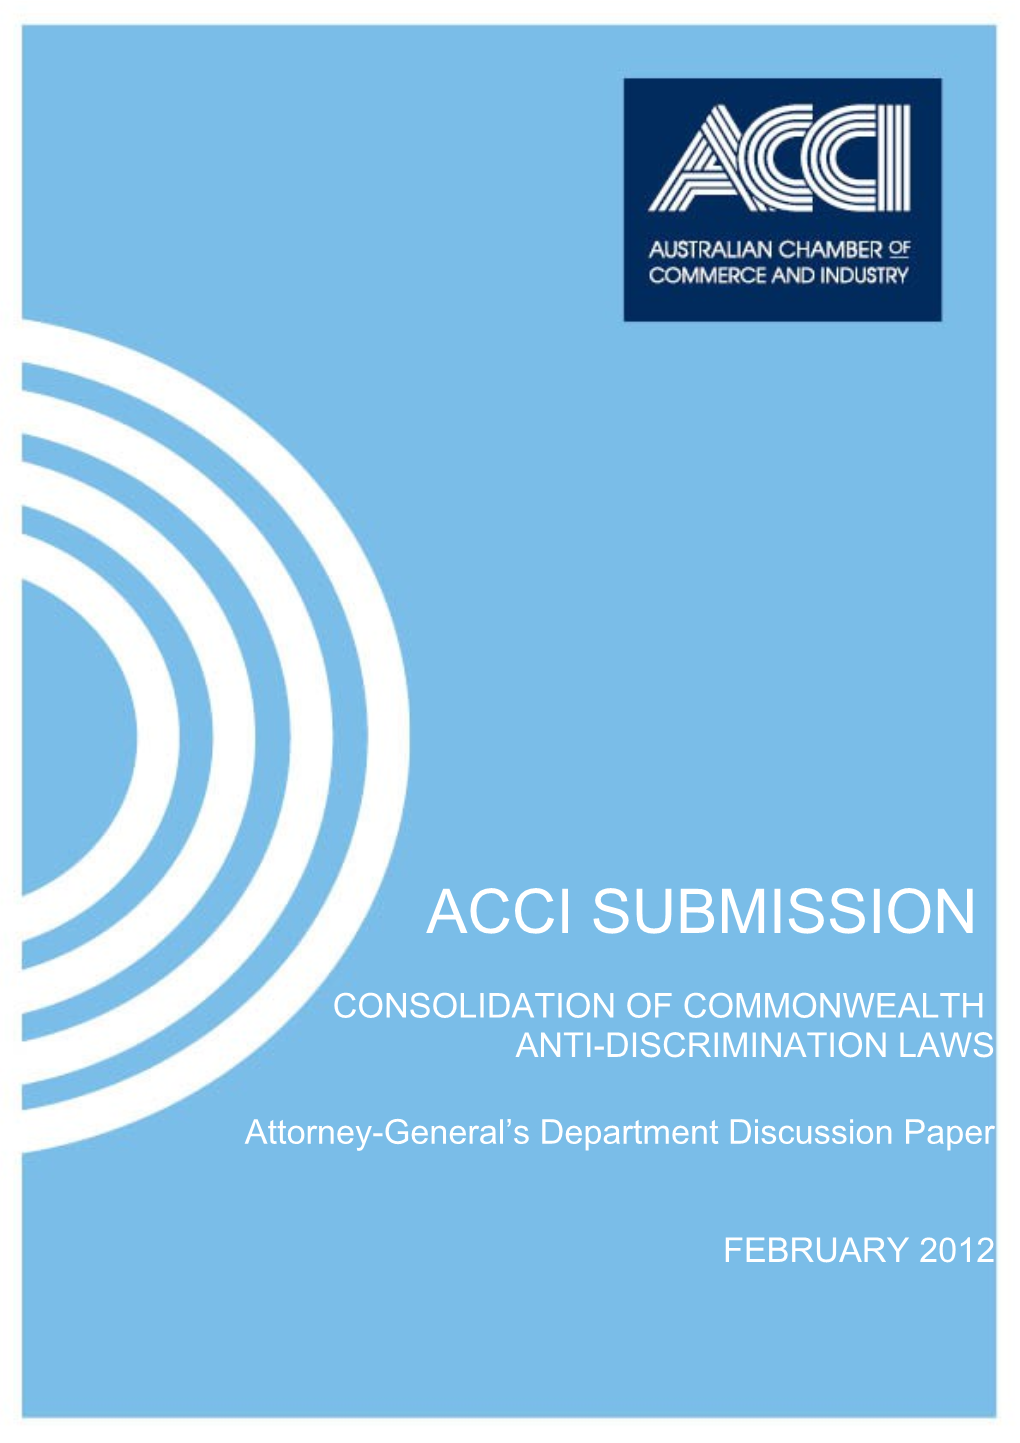 Submission on the Consolidation of Commonwealth Anti-Discrimination Laws - ACCI